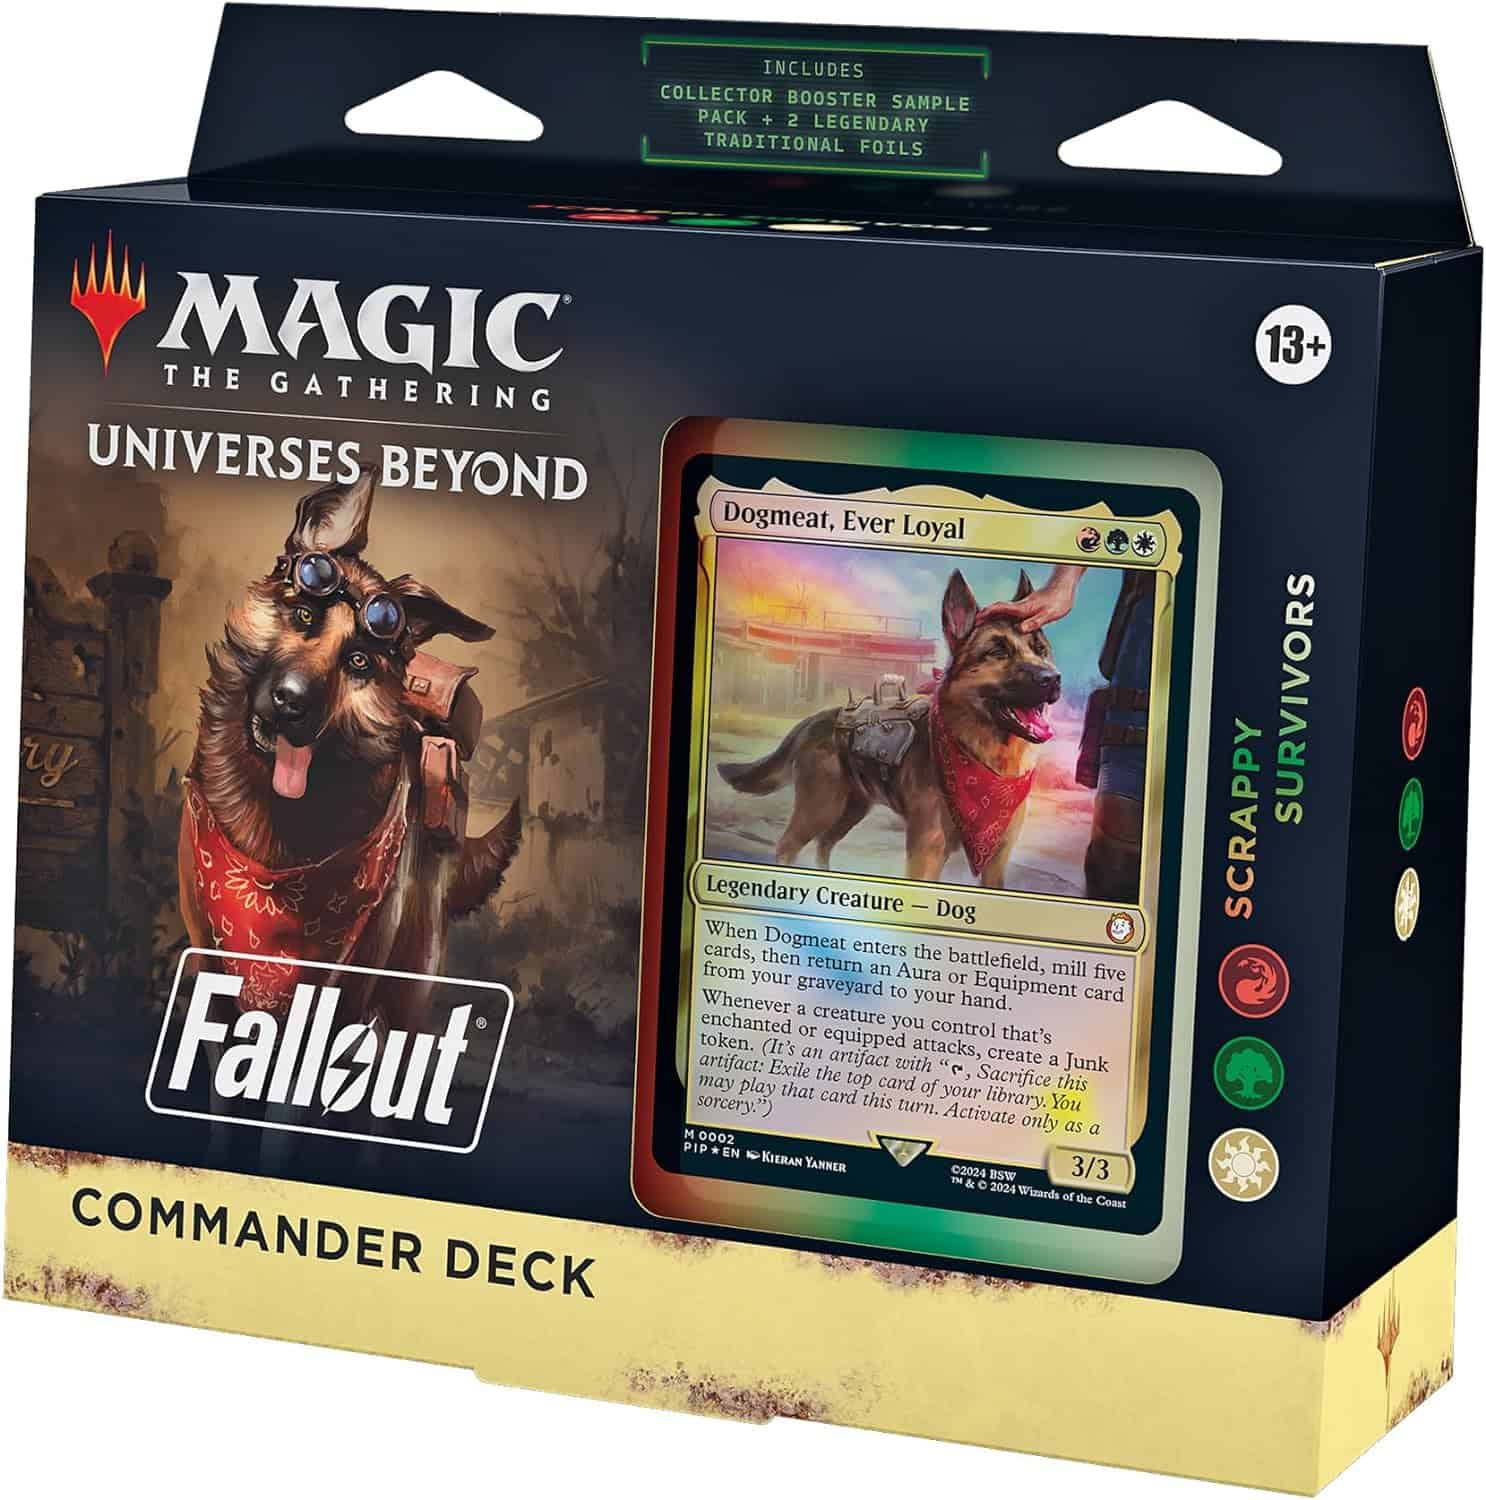 A box with a commander deck and an image of a dog included in the Auto Draft.